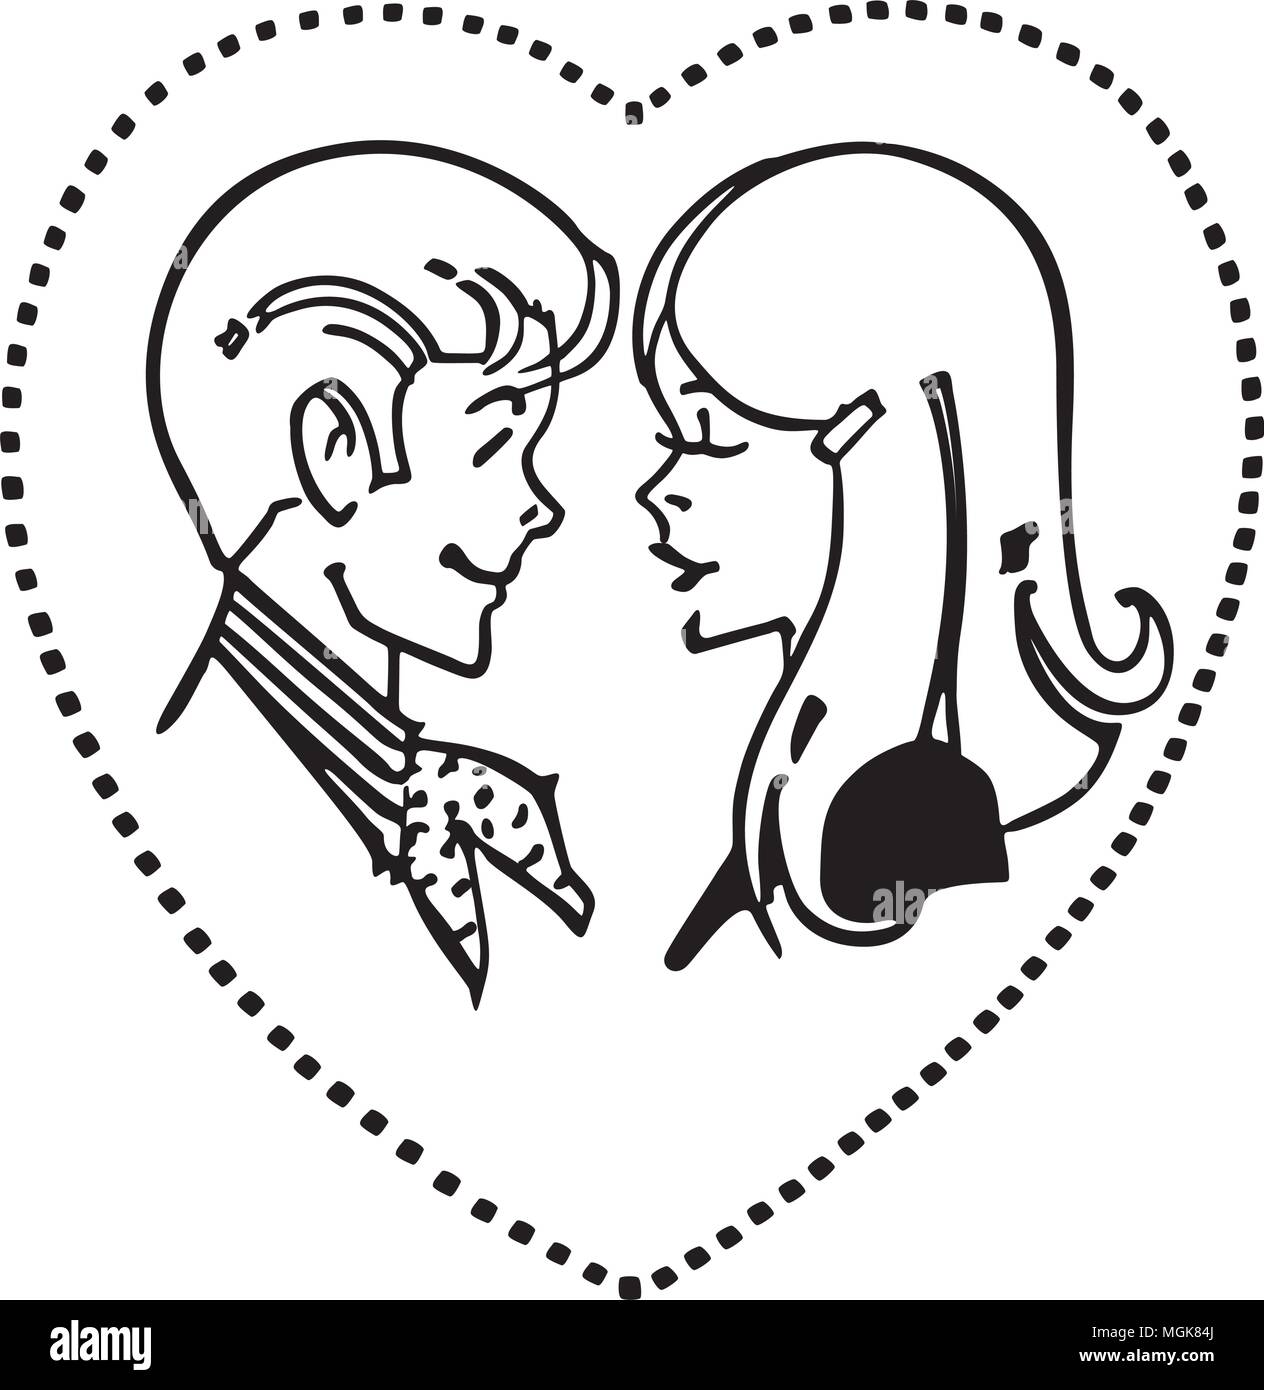 cute love drawings to draw